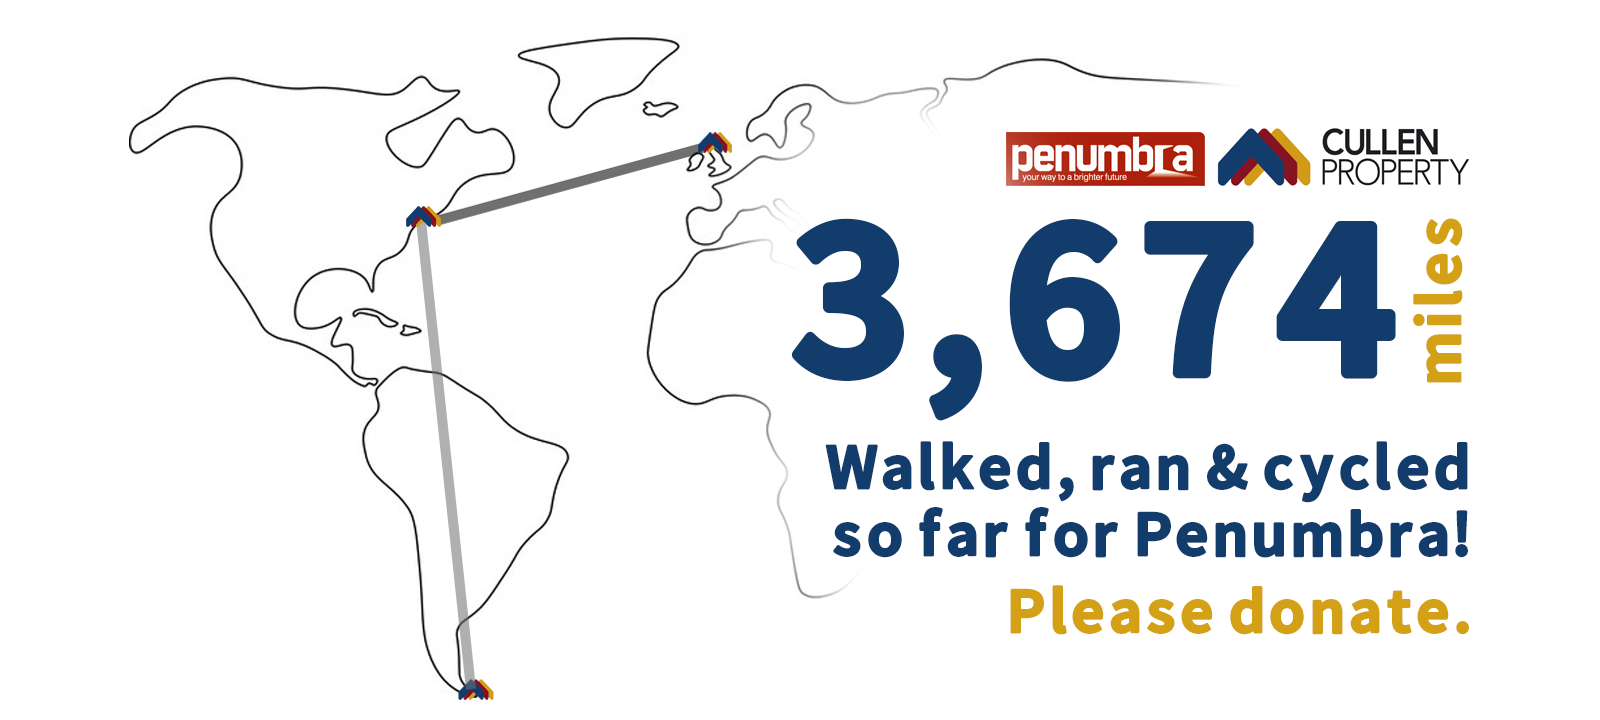 We Are Extending Our Walk, Run, Cycle Challenge In Support Of Penumbra!